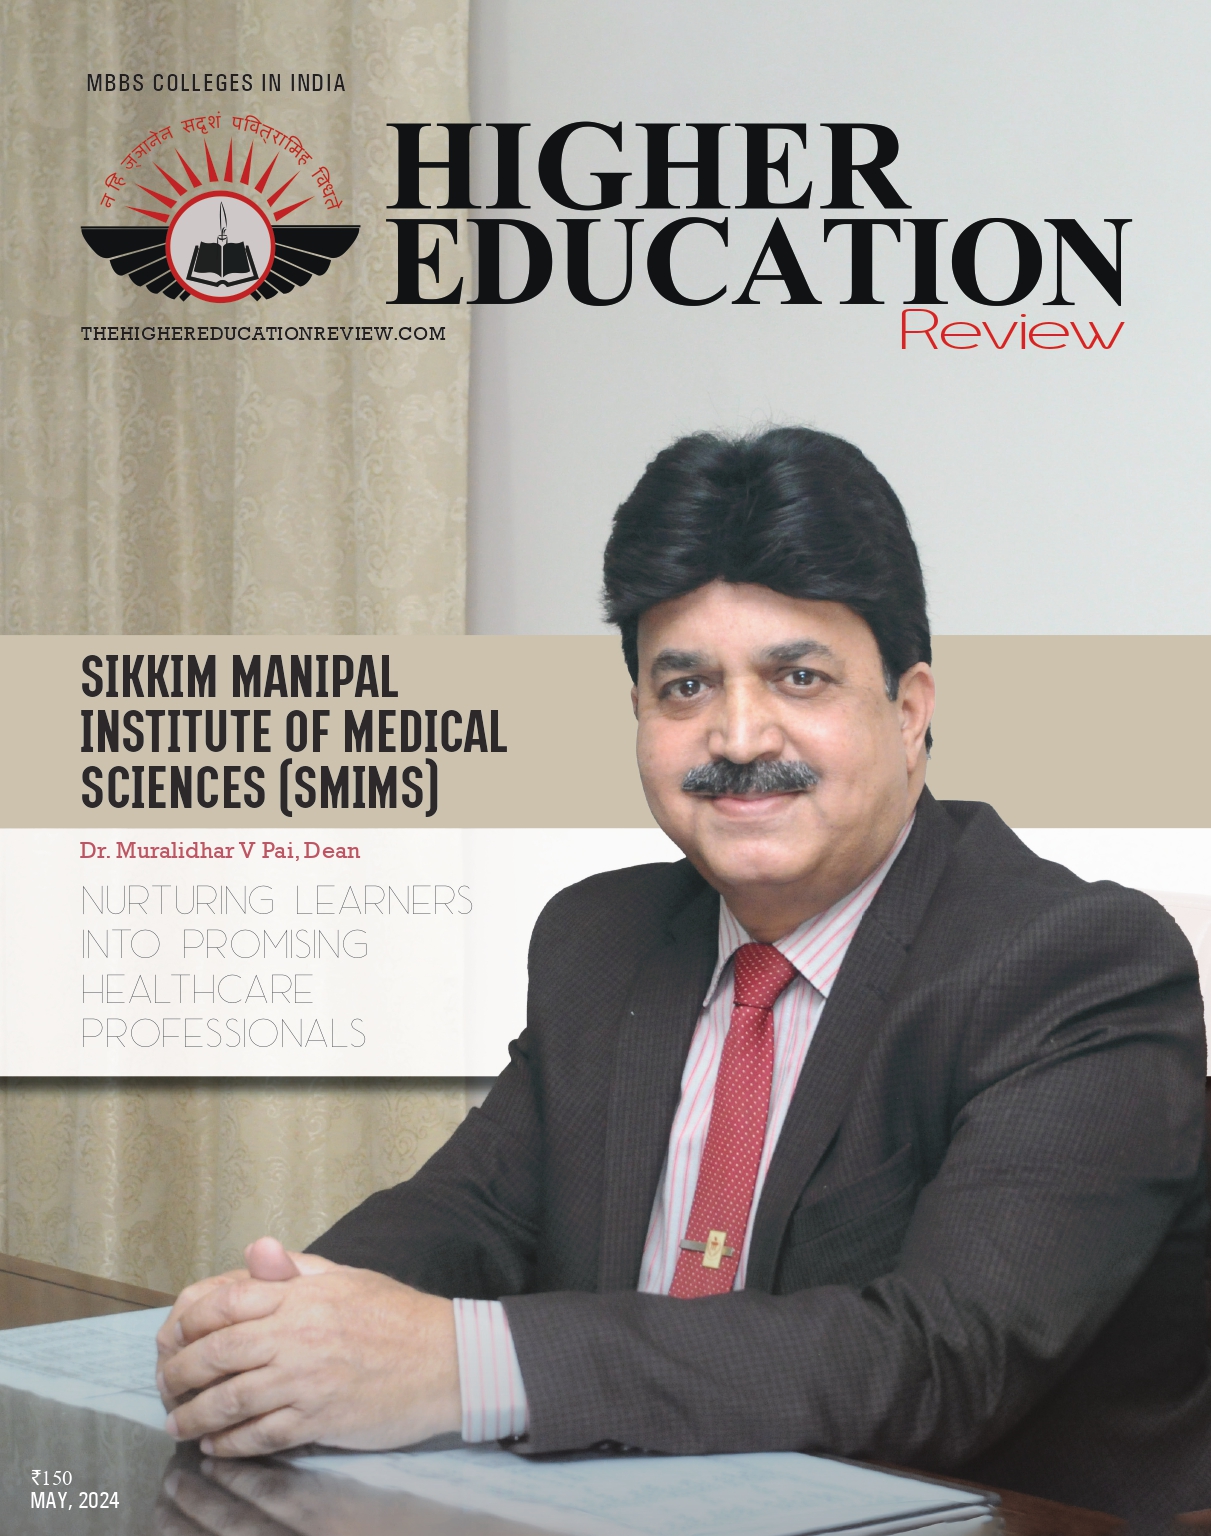 SMIMS Ranks Among Top 10 Promising Medical Colleges in India for 2024 by Higher Education Review Magazine